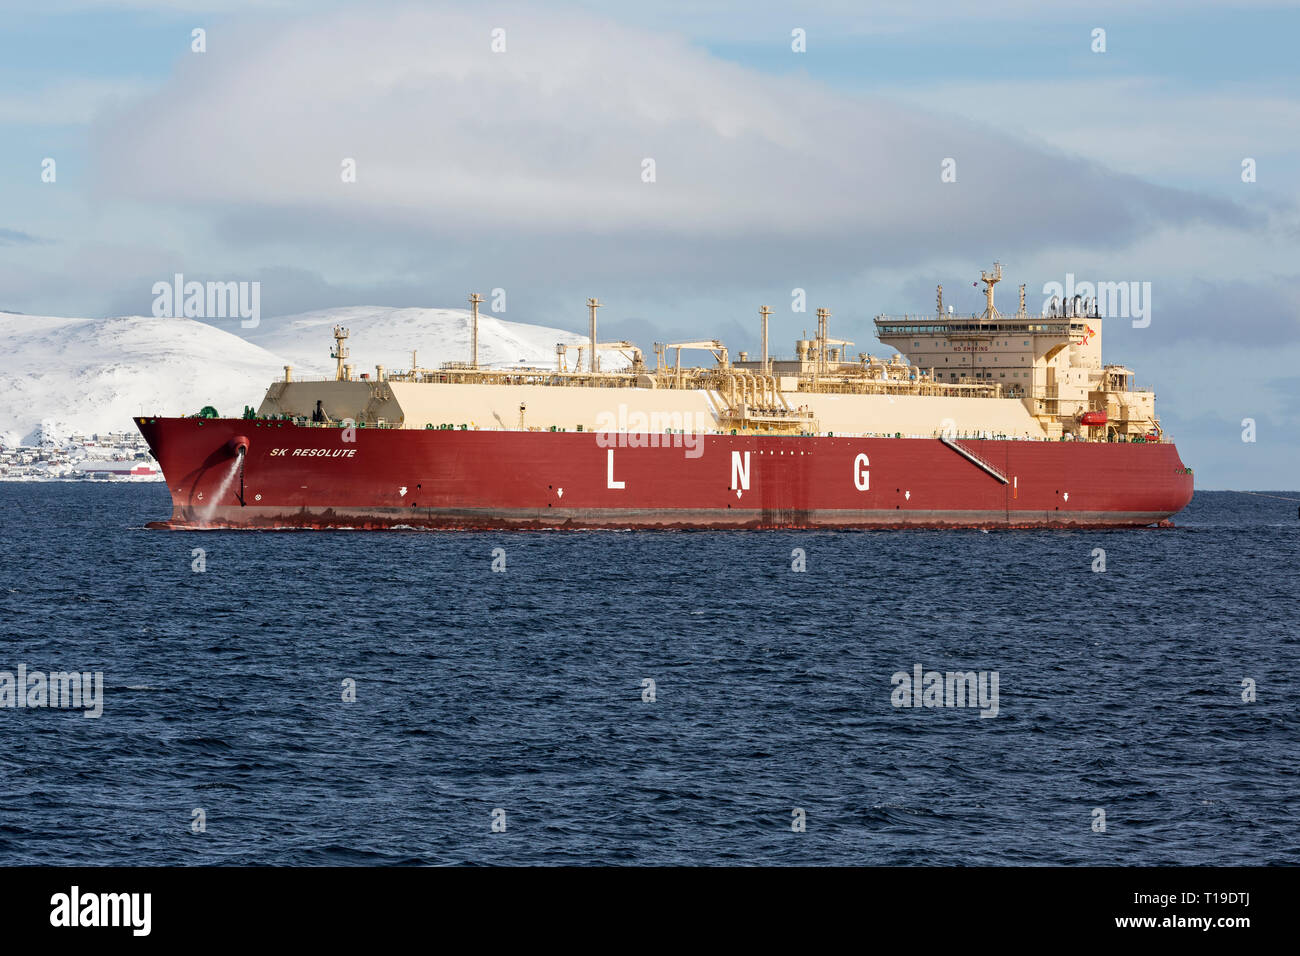 The SK Resolute, a Liquid Natural Gas, LNG, tanker, built in 2018, under anchor in the Norwegian Fjords. Stock Photo